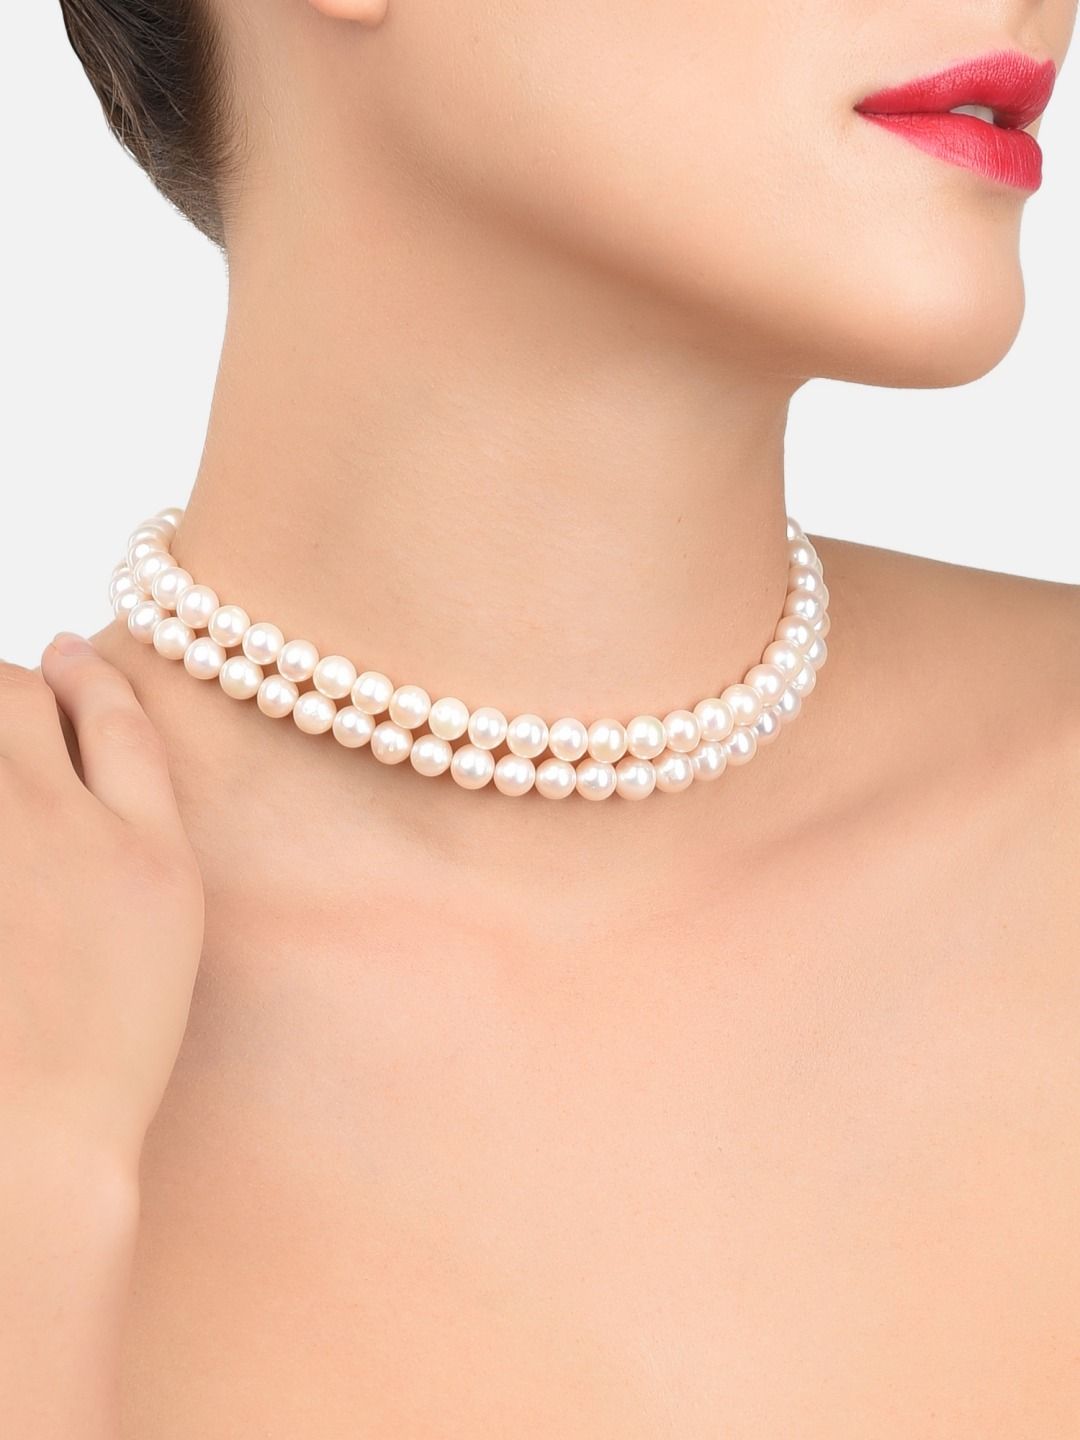 Zaveri Pearls White Gold-Plated Freshwater Pearl Choker Necklace Price in India